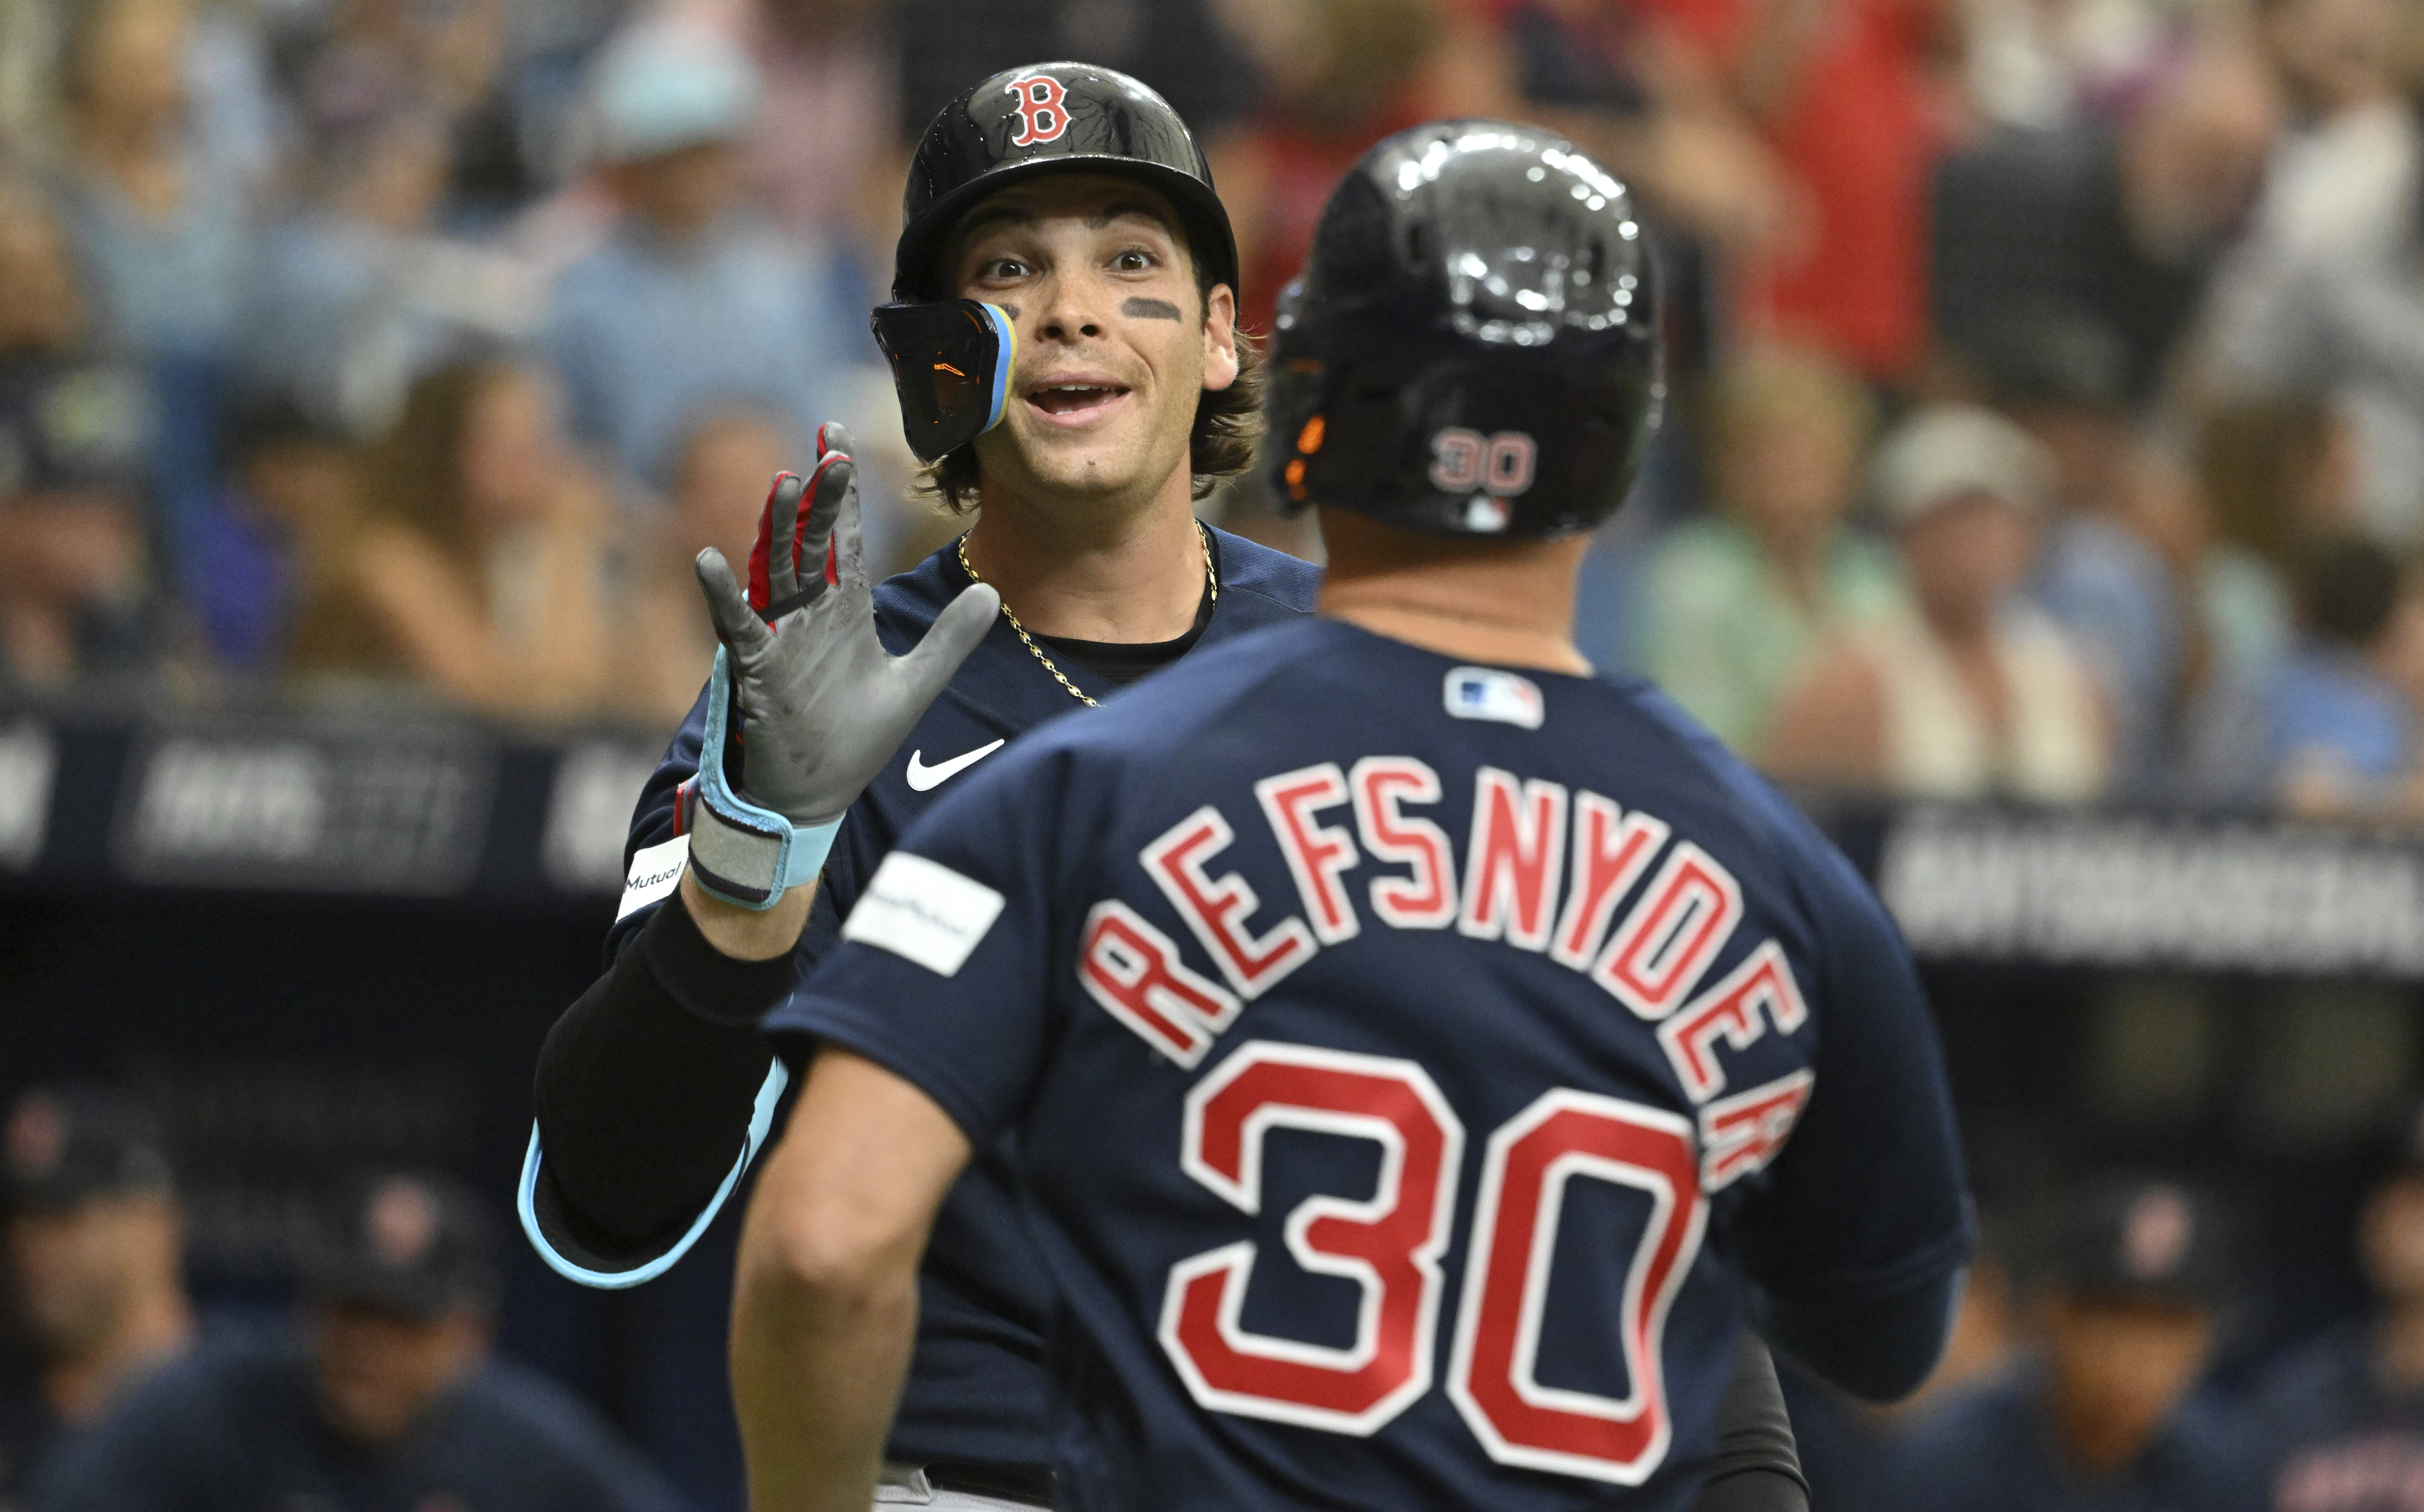 Rays tie record with 13-0 start, rally to beat Red Sox 9-3 - NBC Sports